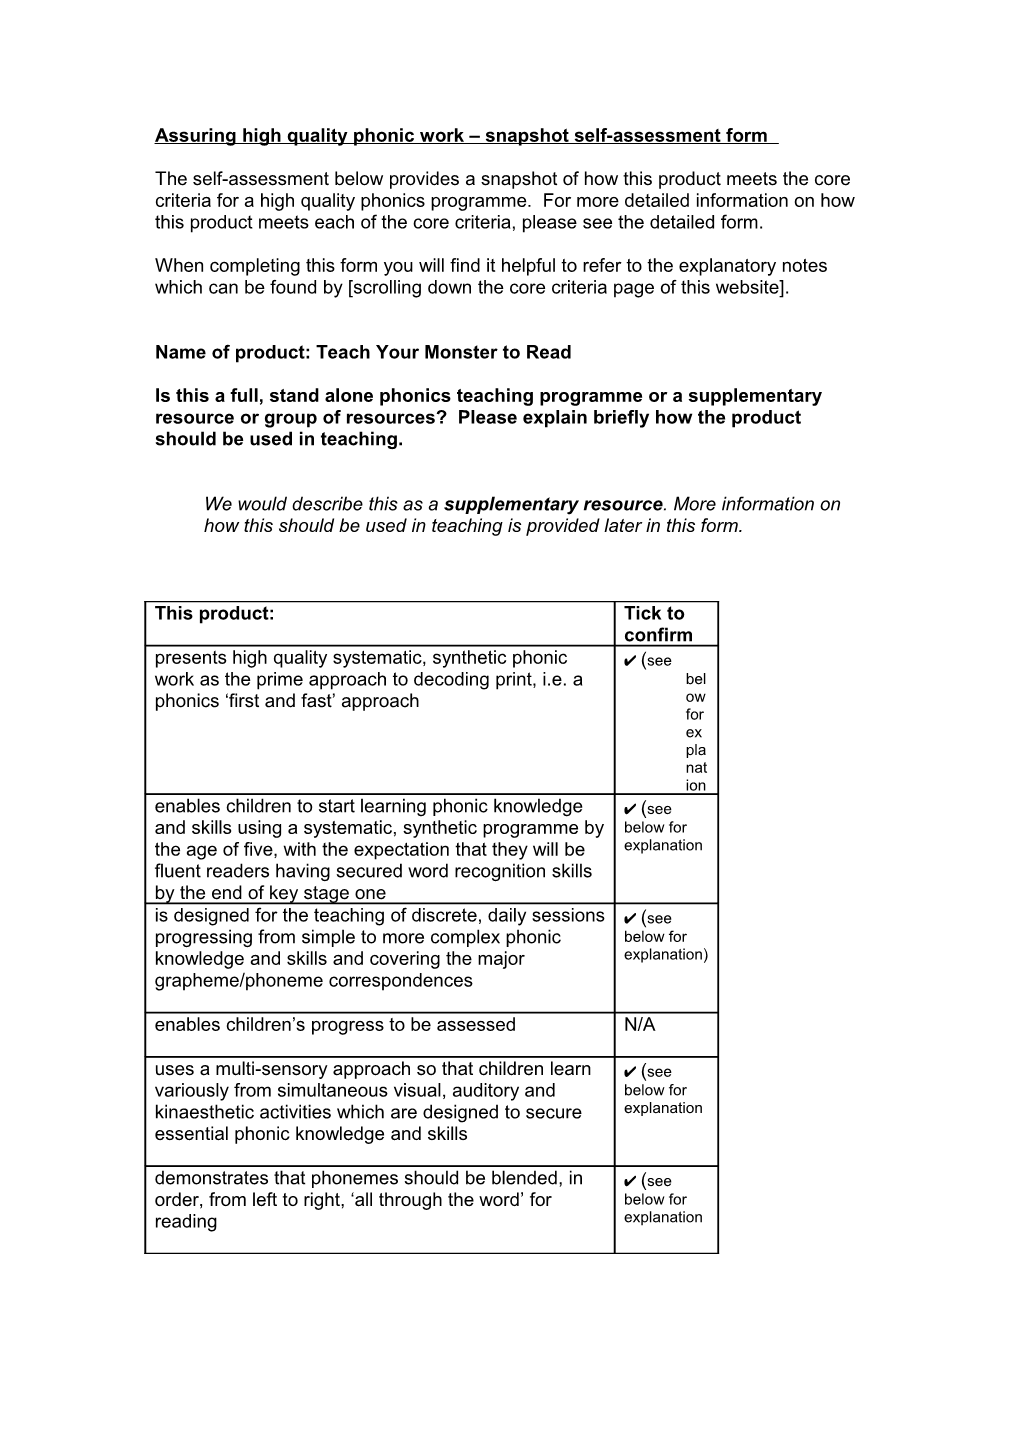 Further Information About the Self-Assessment Process